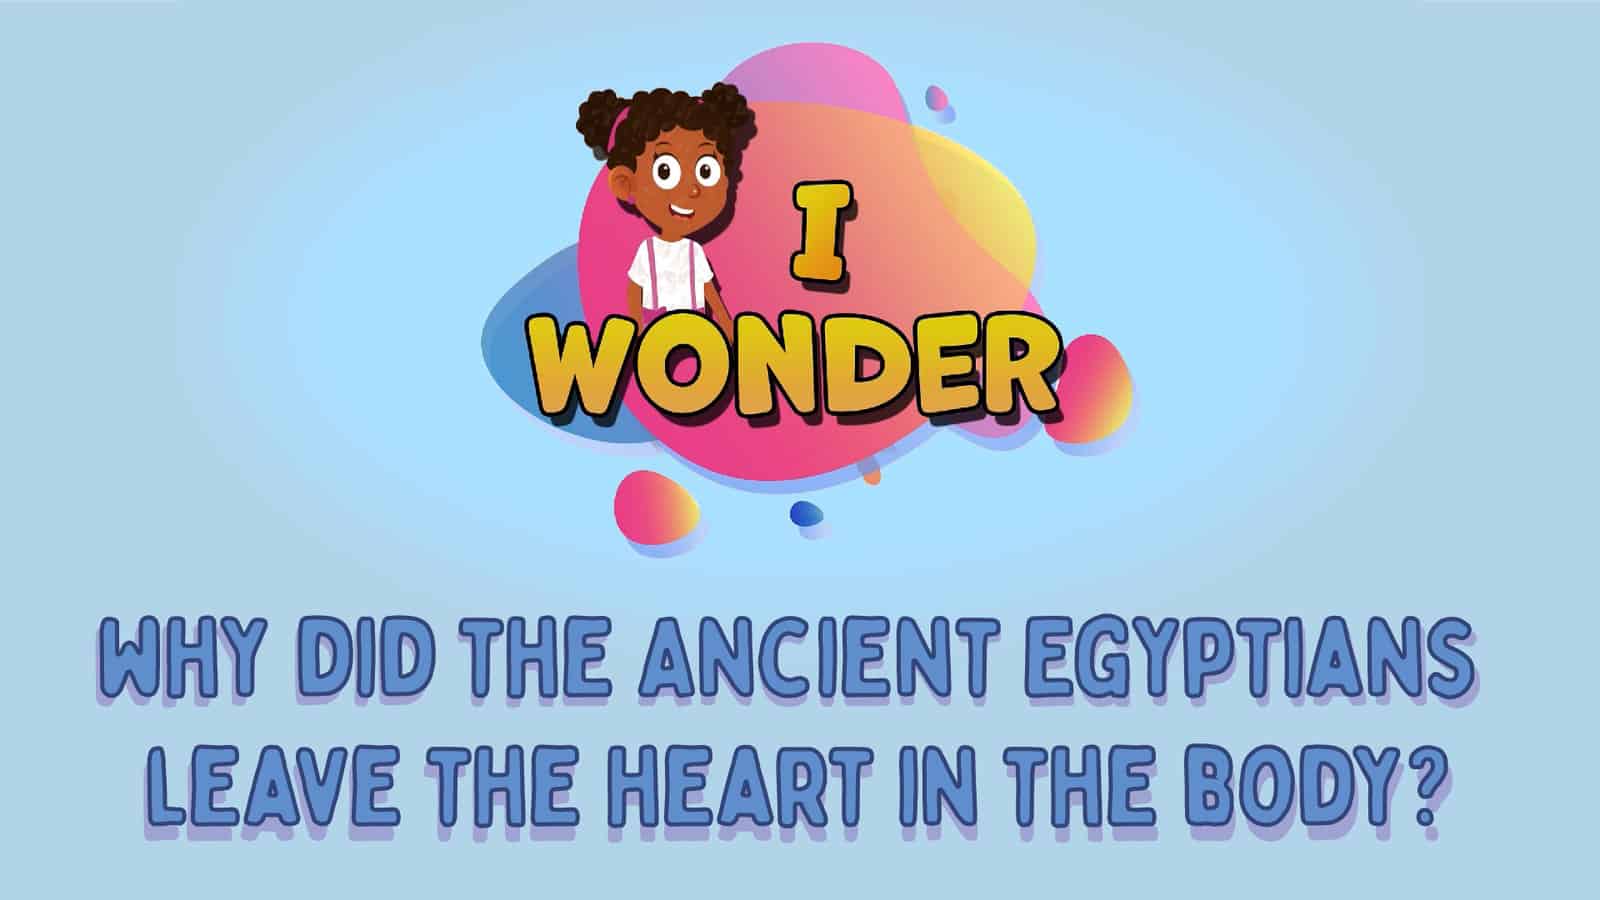 Why Did The Ancient Egyptians Leave The Heart In The Body?